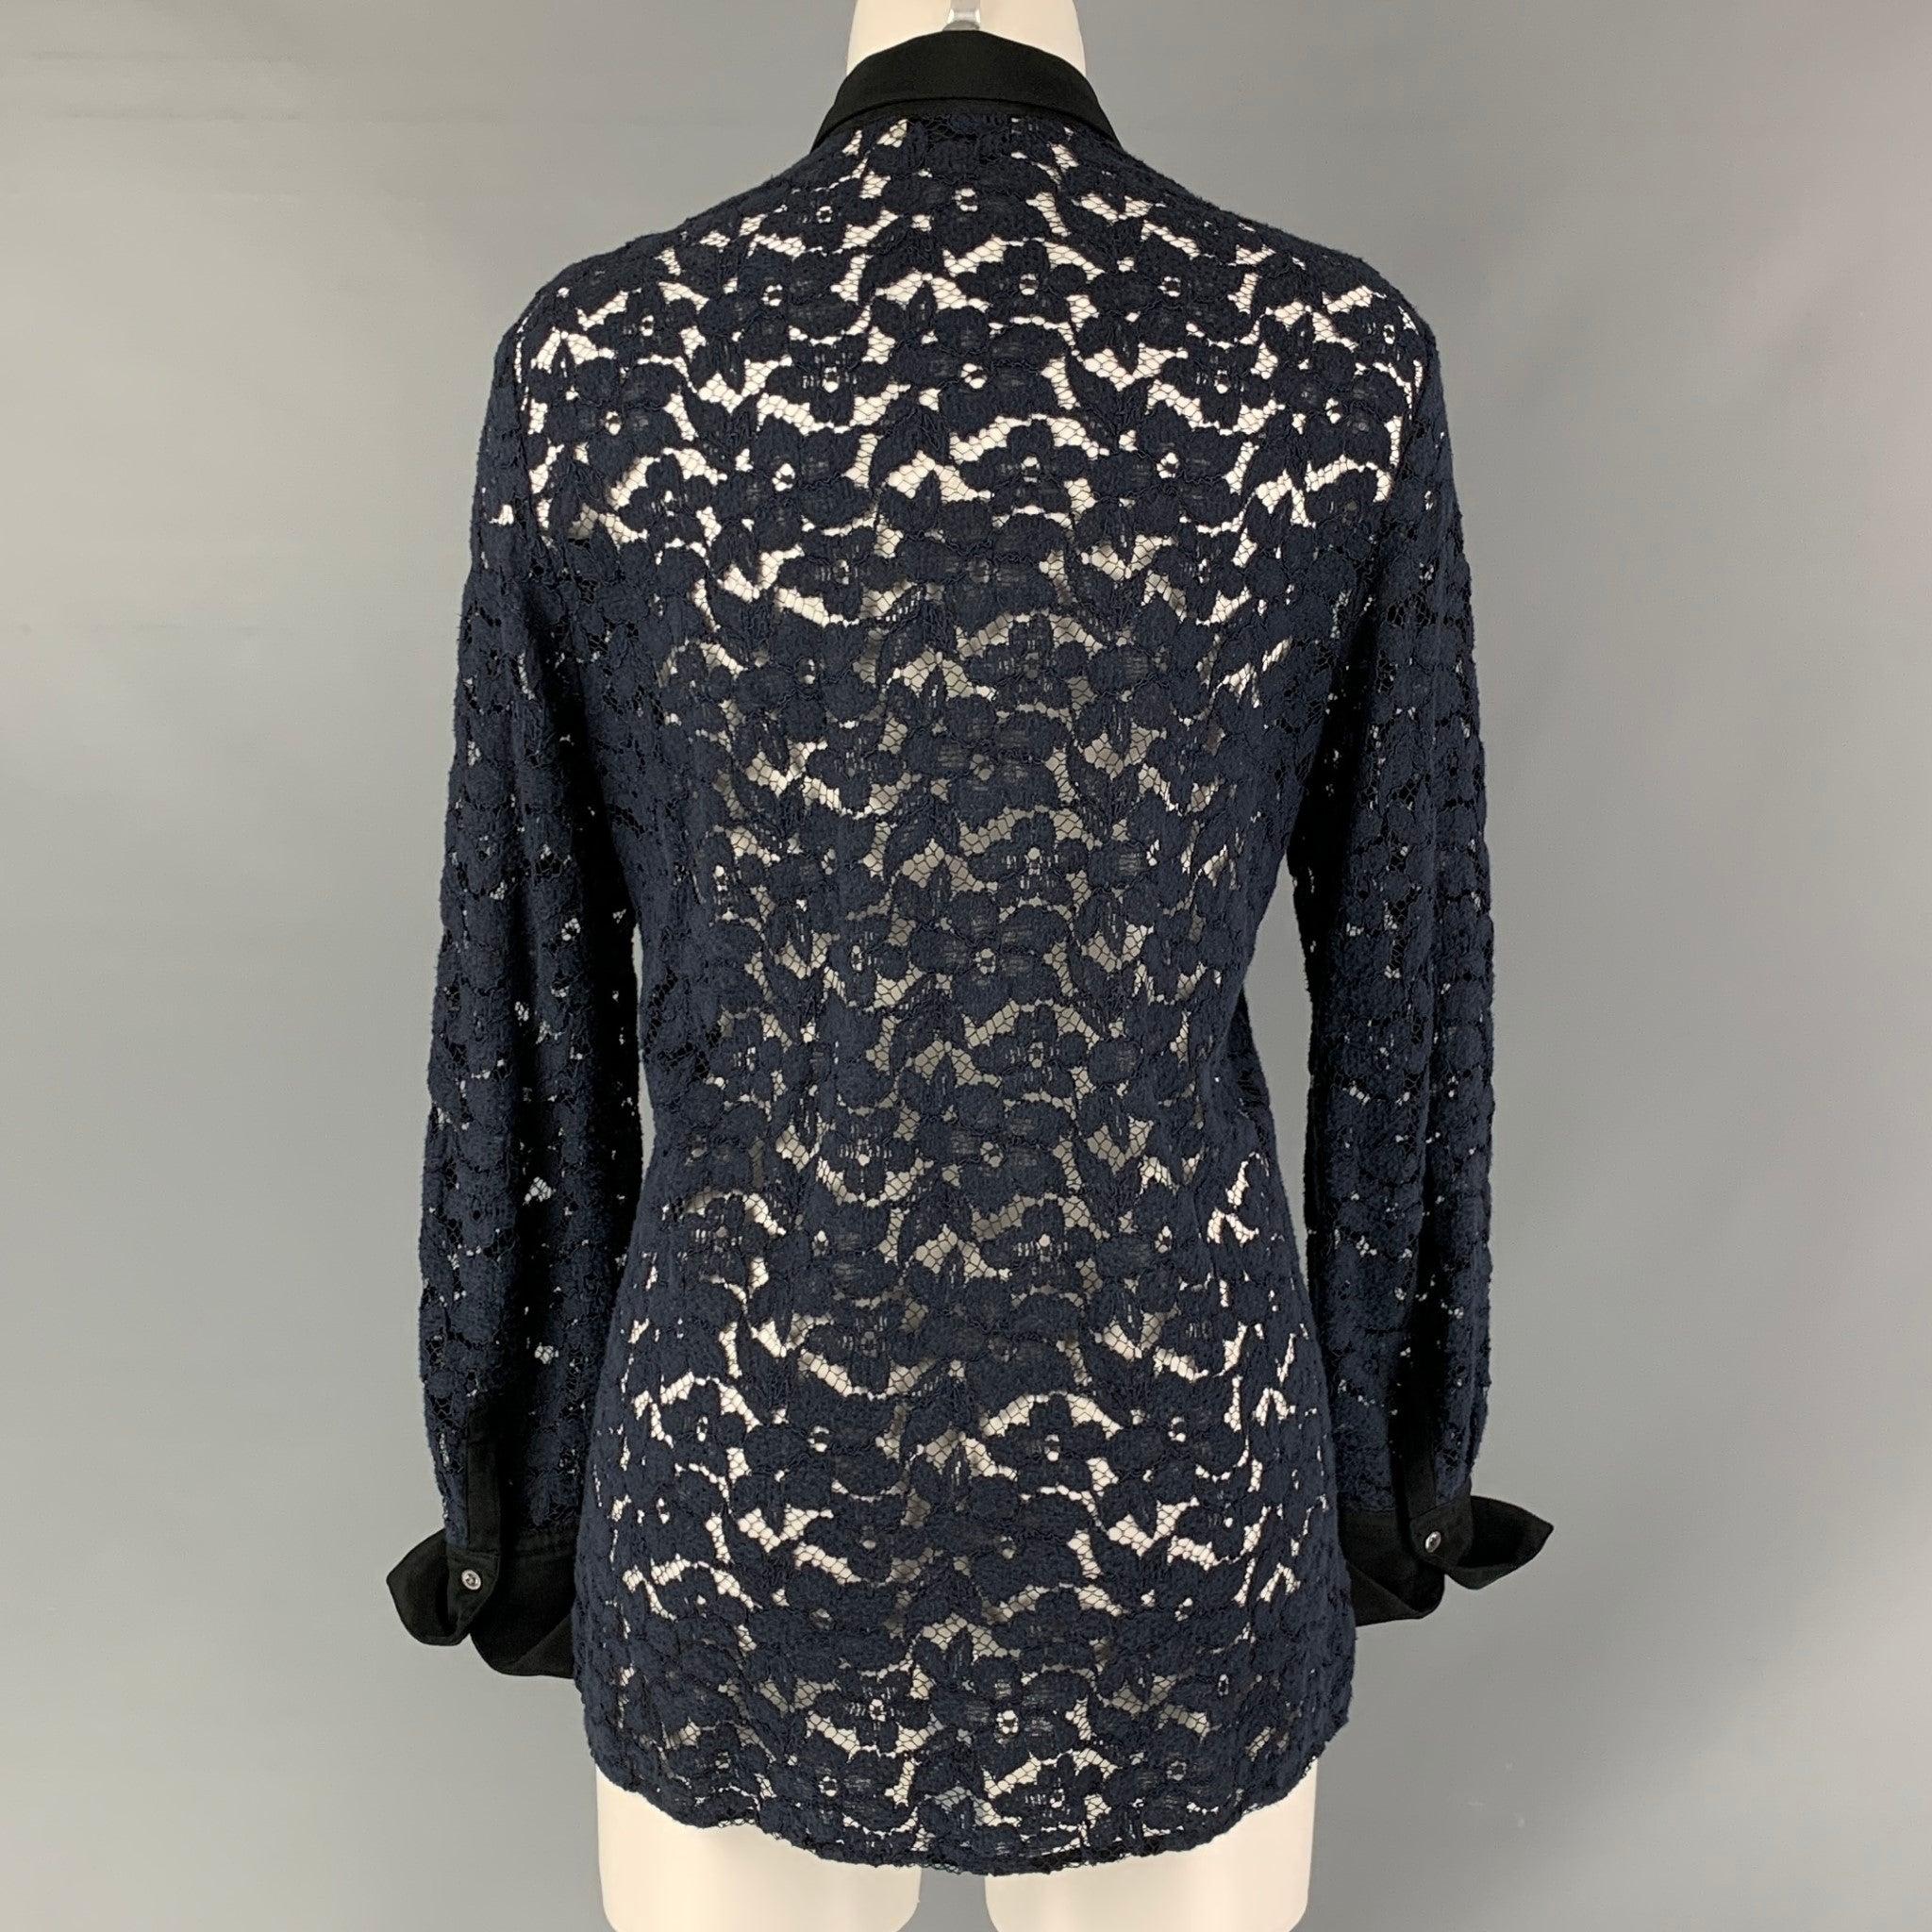 3.1 PHILLIP LIM Navy Lace Hidden Placket Size 4 Black Viscose Blend Shirt In Excellent Condition For Sale In San Francisco, CA